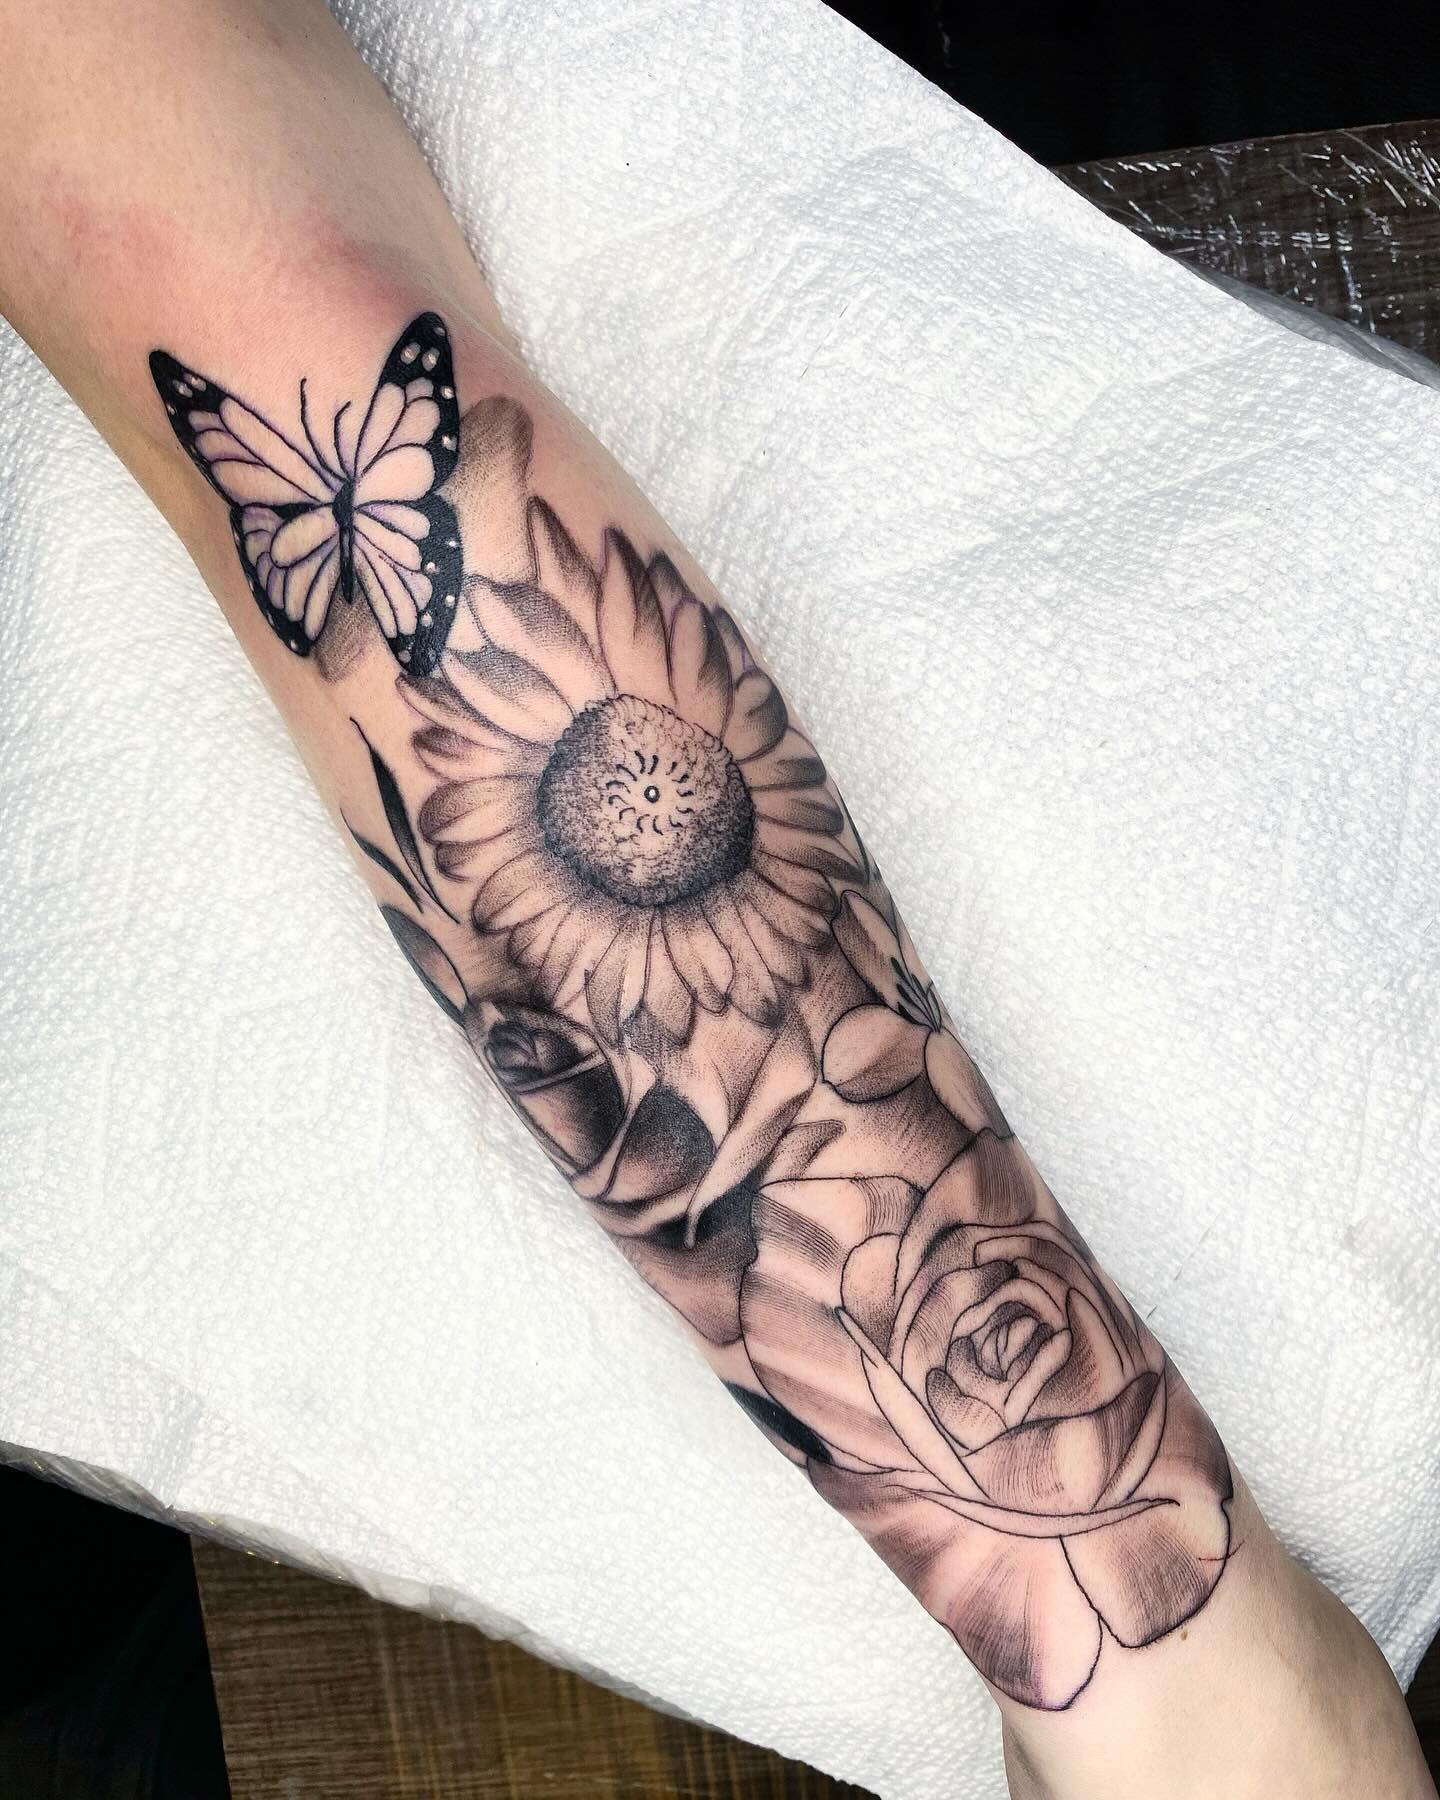 Floral forearm tattoo with a detailed butterfly